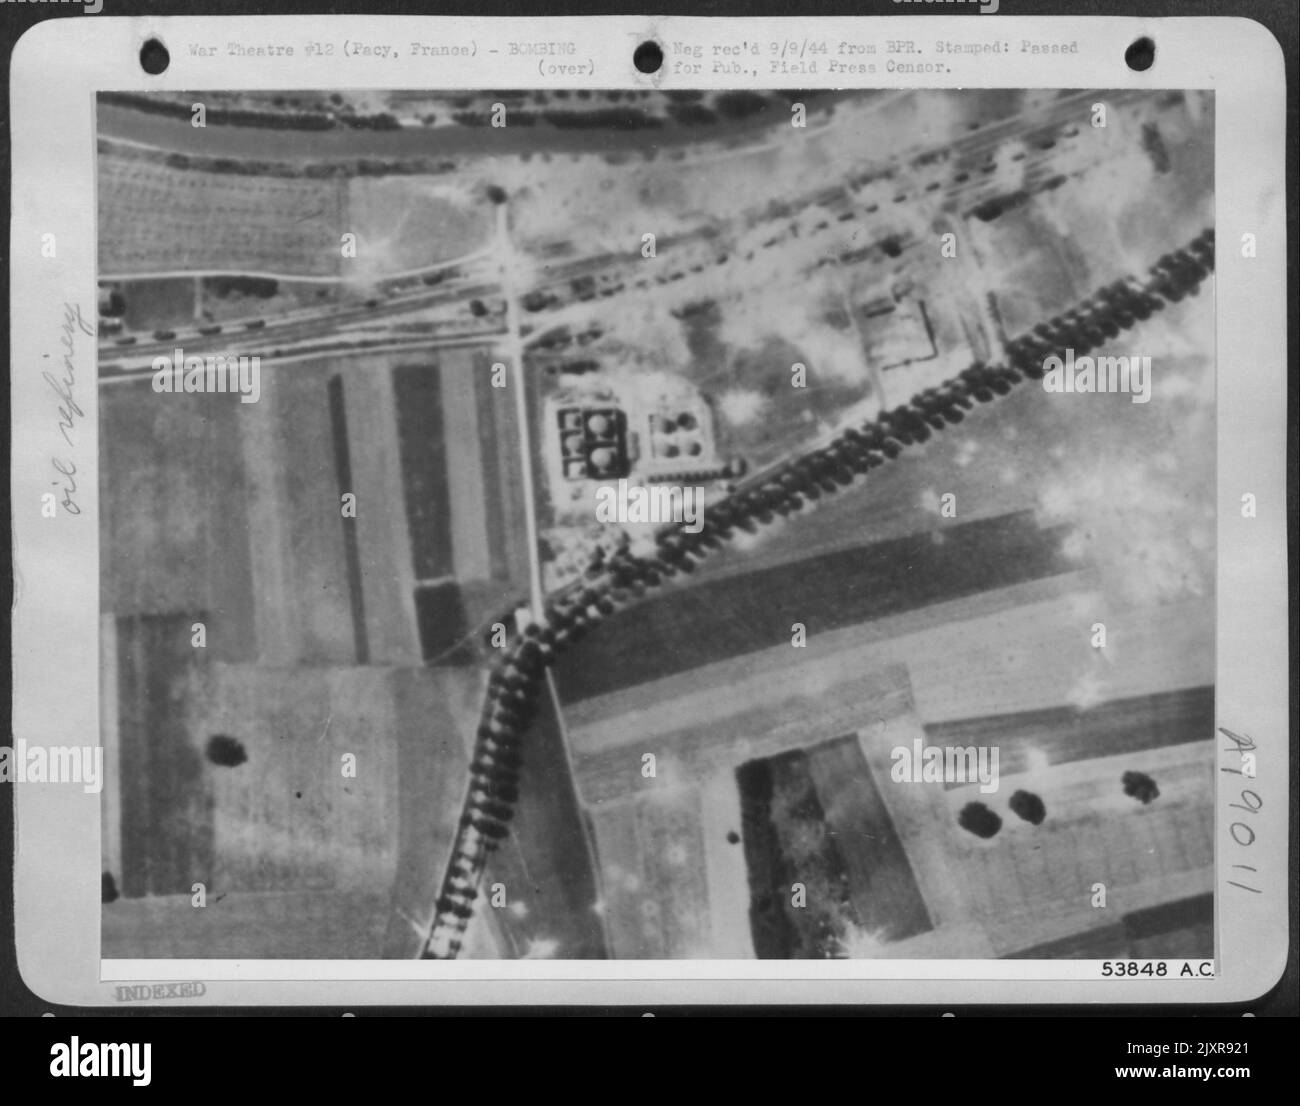 These three photos reveal what happened 18 Aug 44, when 8th AF bombers attacked the German oil depot at Pacy, near Evereux, France. This gives an idea of the minute size of targets presented to bomber crews when flying at great heights. Stock Photo